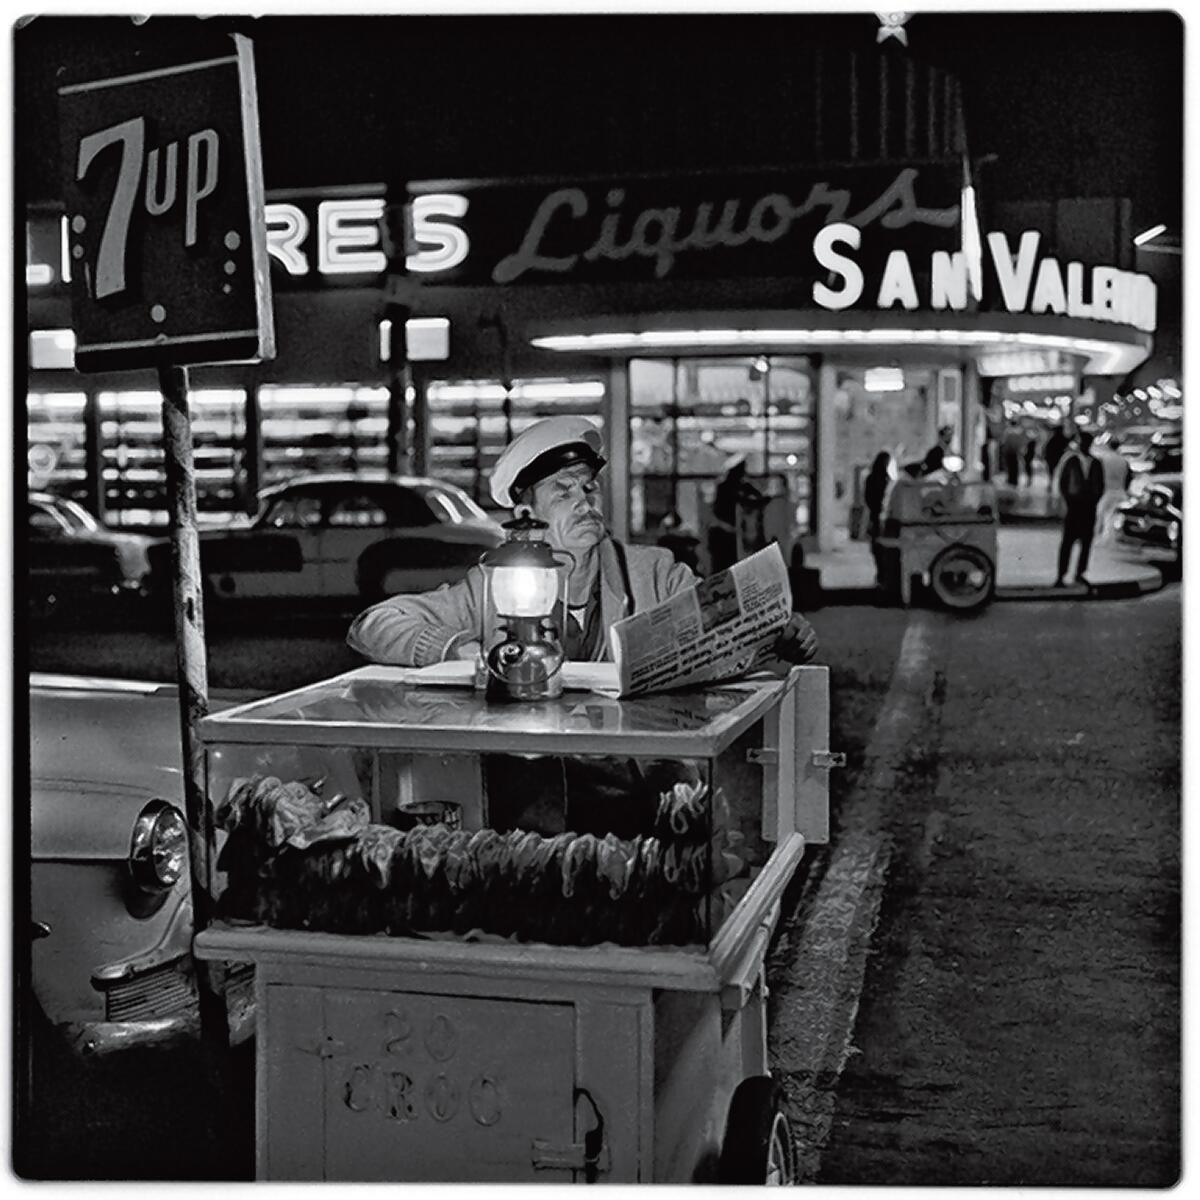 A taco vender catching up on the day’s news until the next customer shows up. Gelatin Silver Print, 1964. Photograph by Harry Crosby. Collection of Paul Ganster